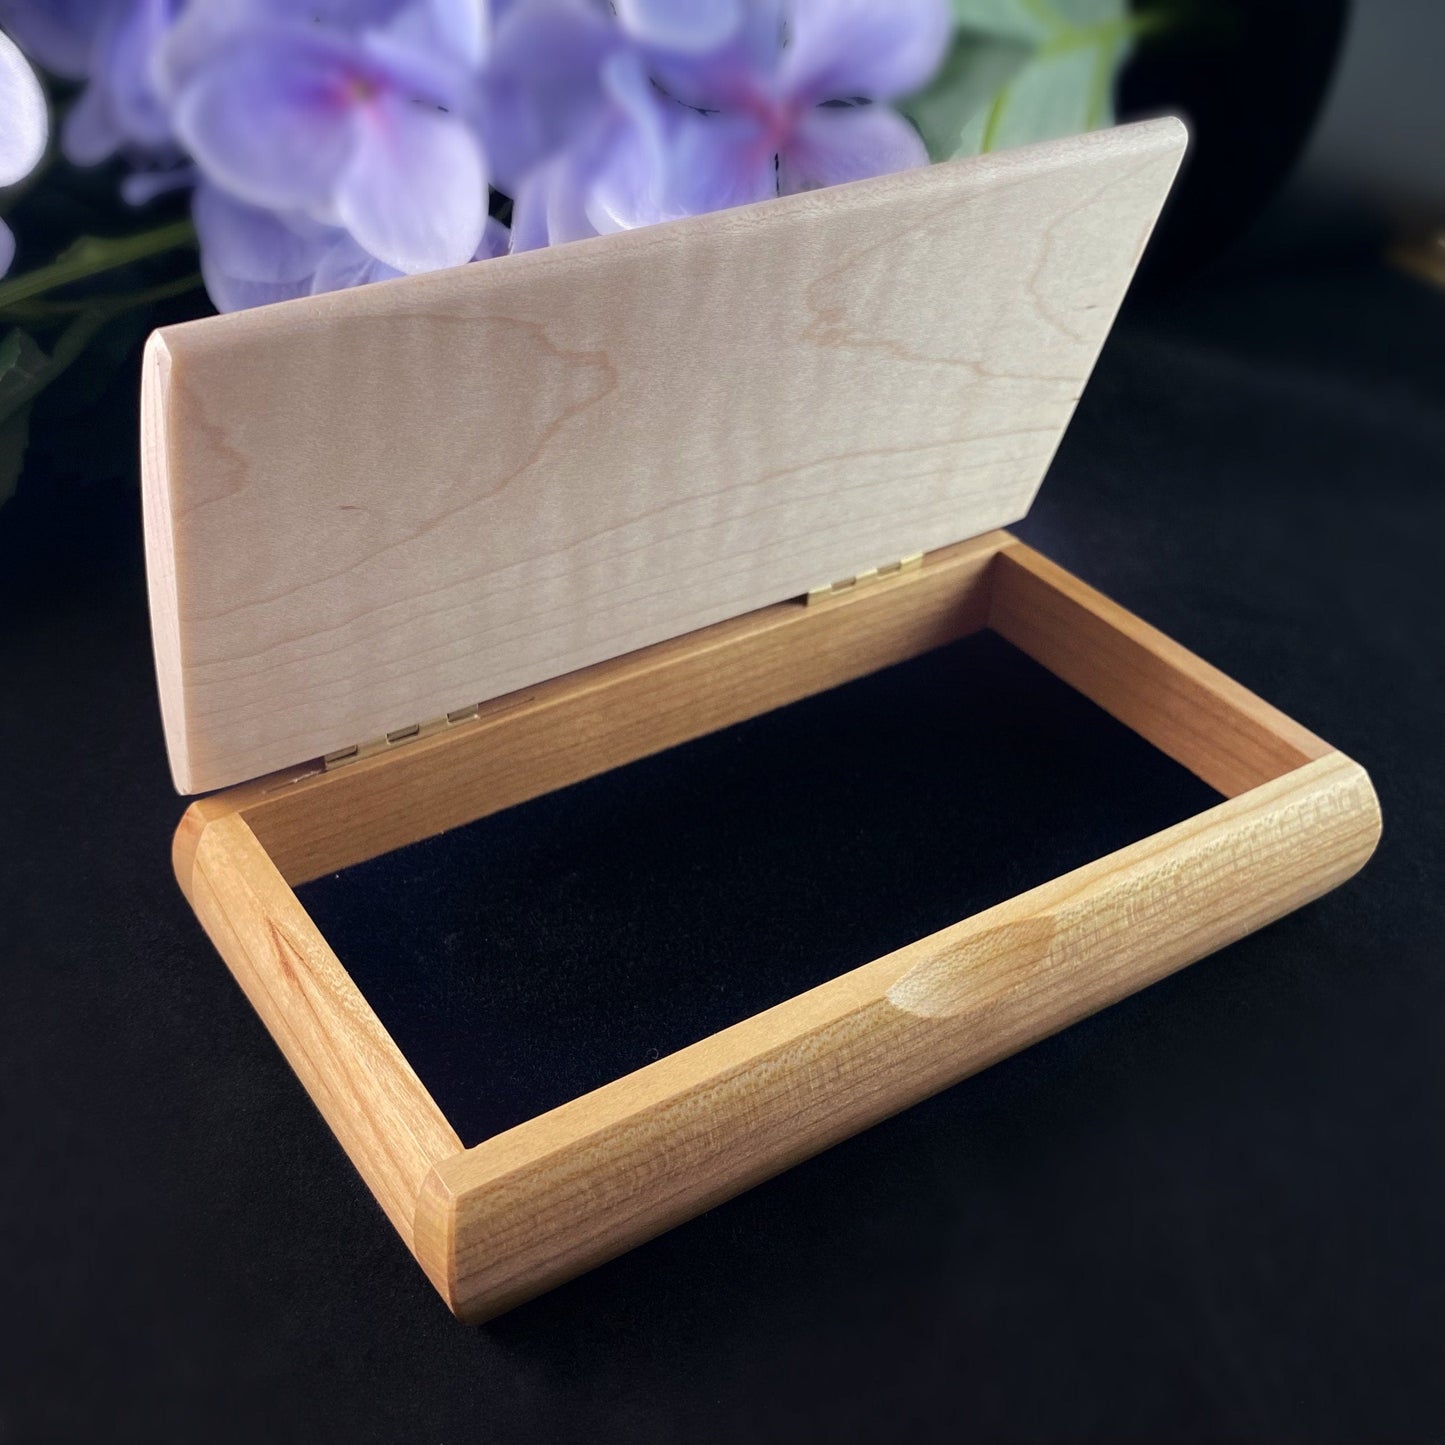 Sisters by Birth Quote Box, Handmade Wooden Box with Curly Maple and Cherry, made in USA